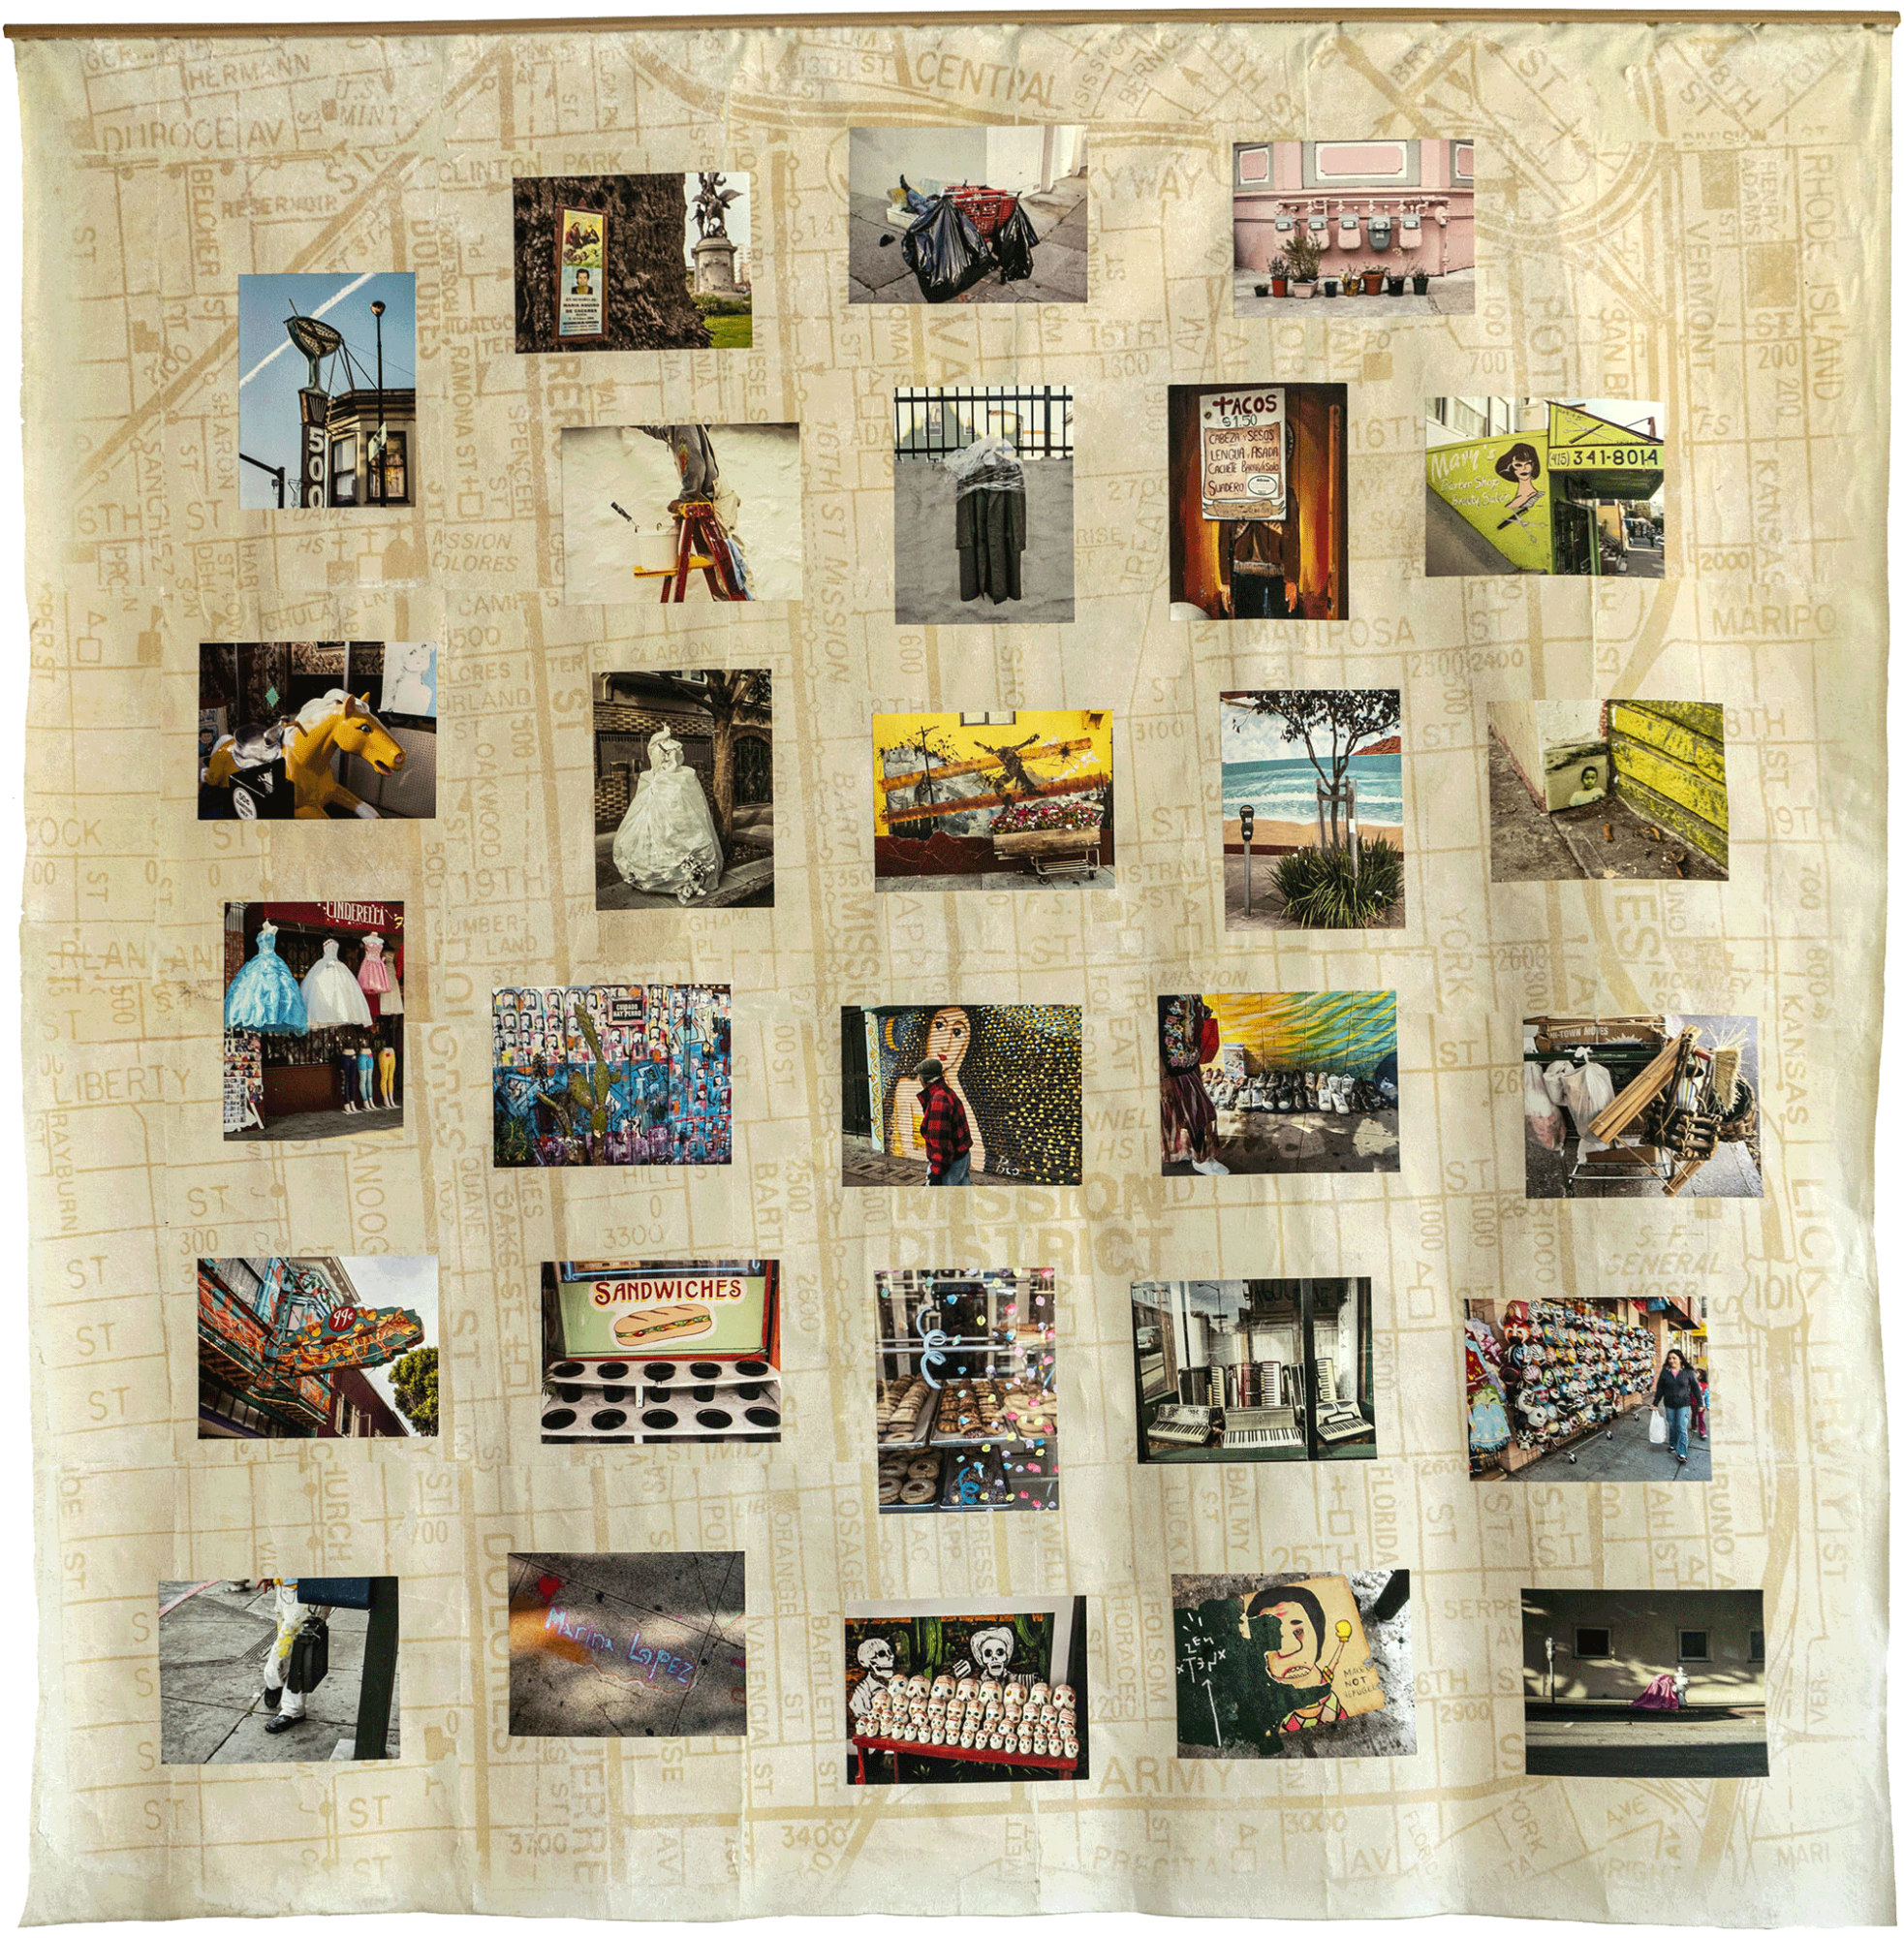 Messages from the Mission
6' x 6' wall hanging
Photographic prints affixed to canvas map